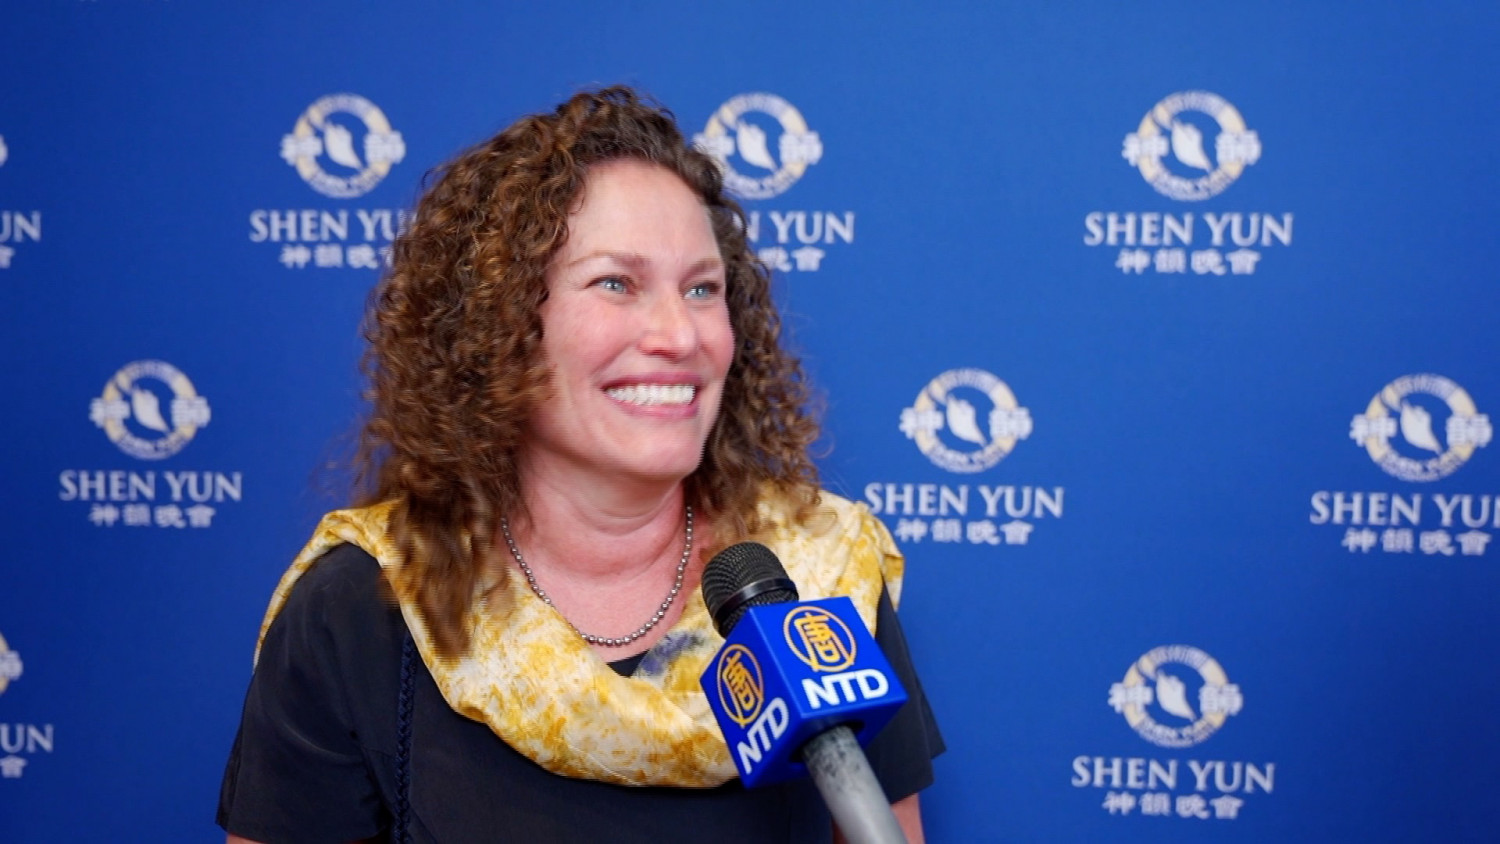 Shen Yun Shows a Very Positive Image of China, Says Purchase Audience